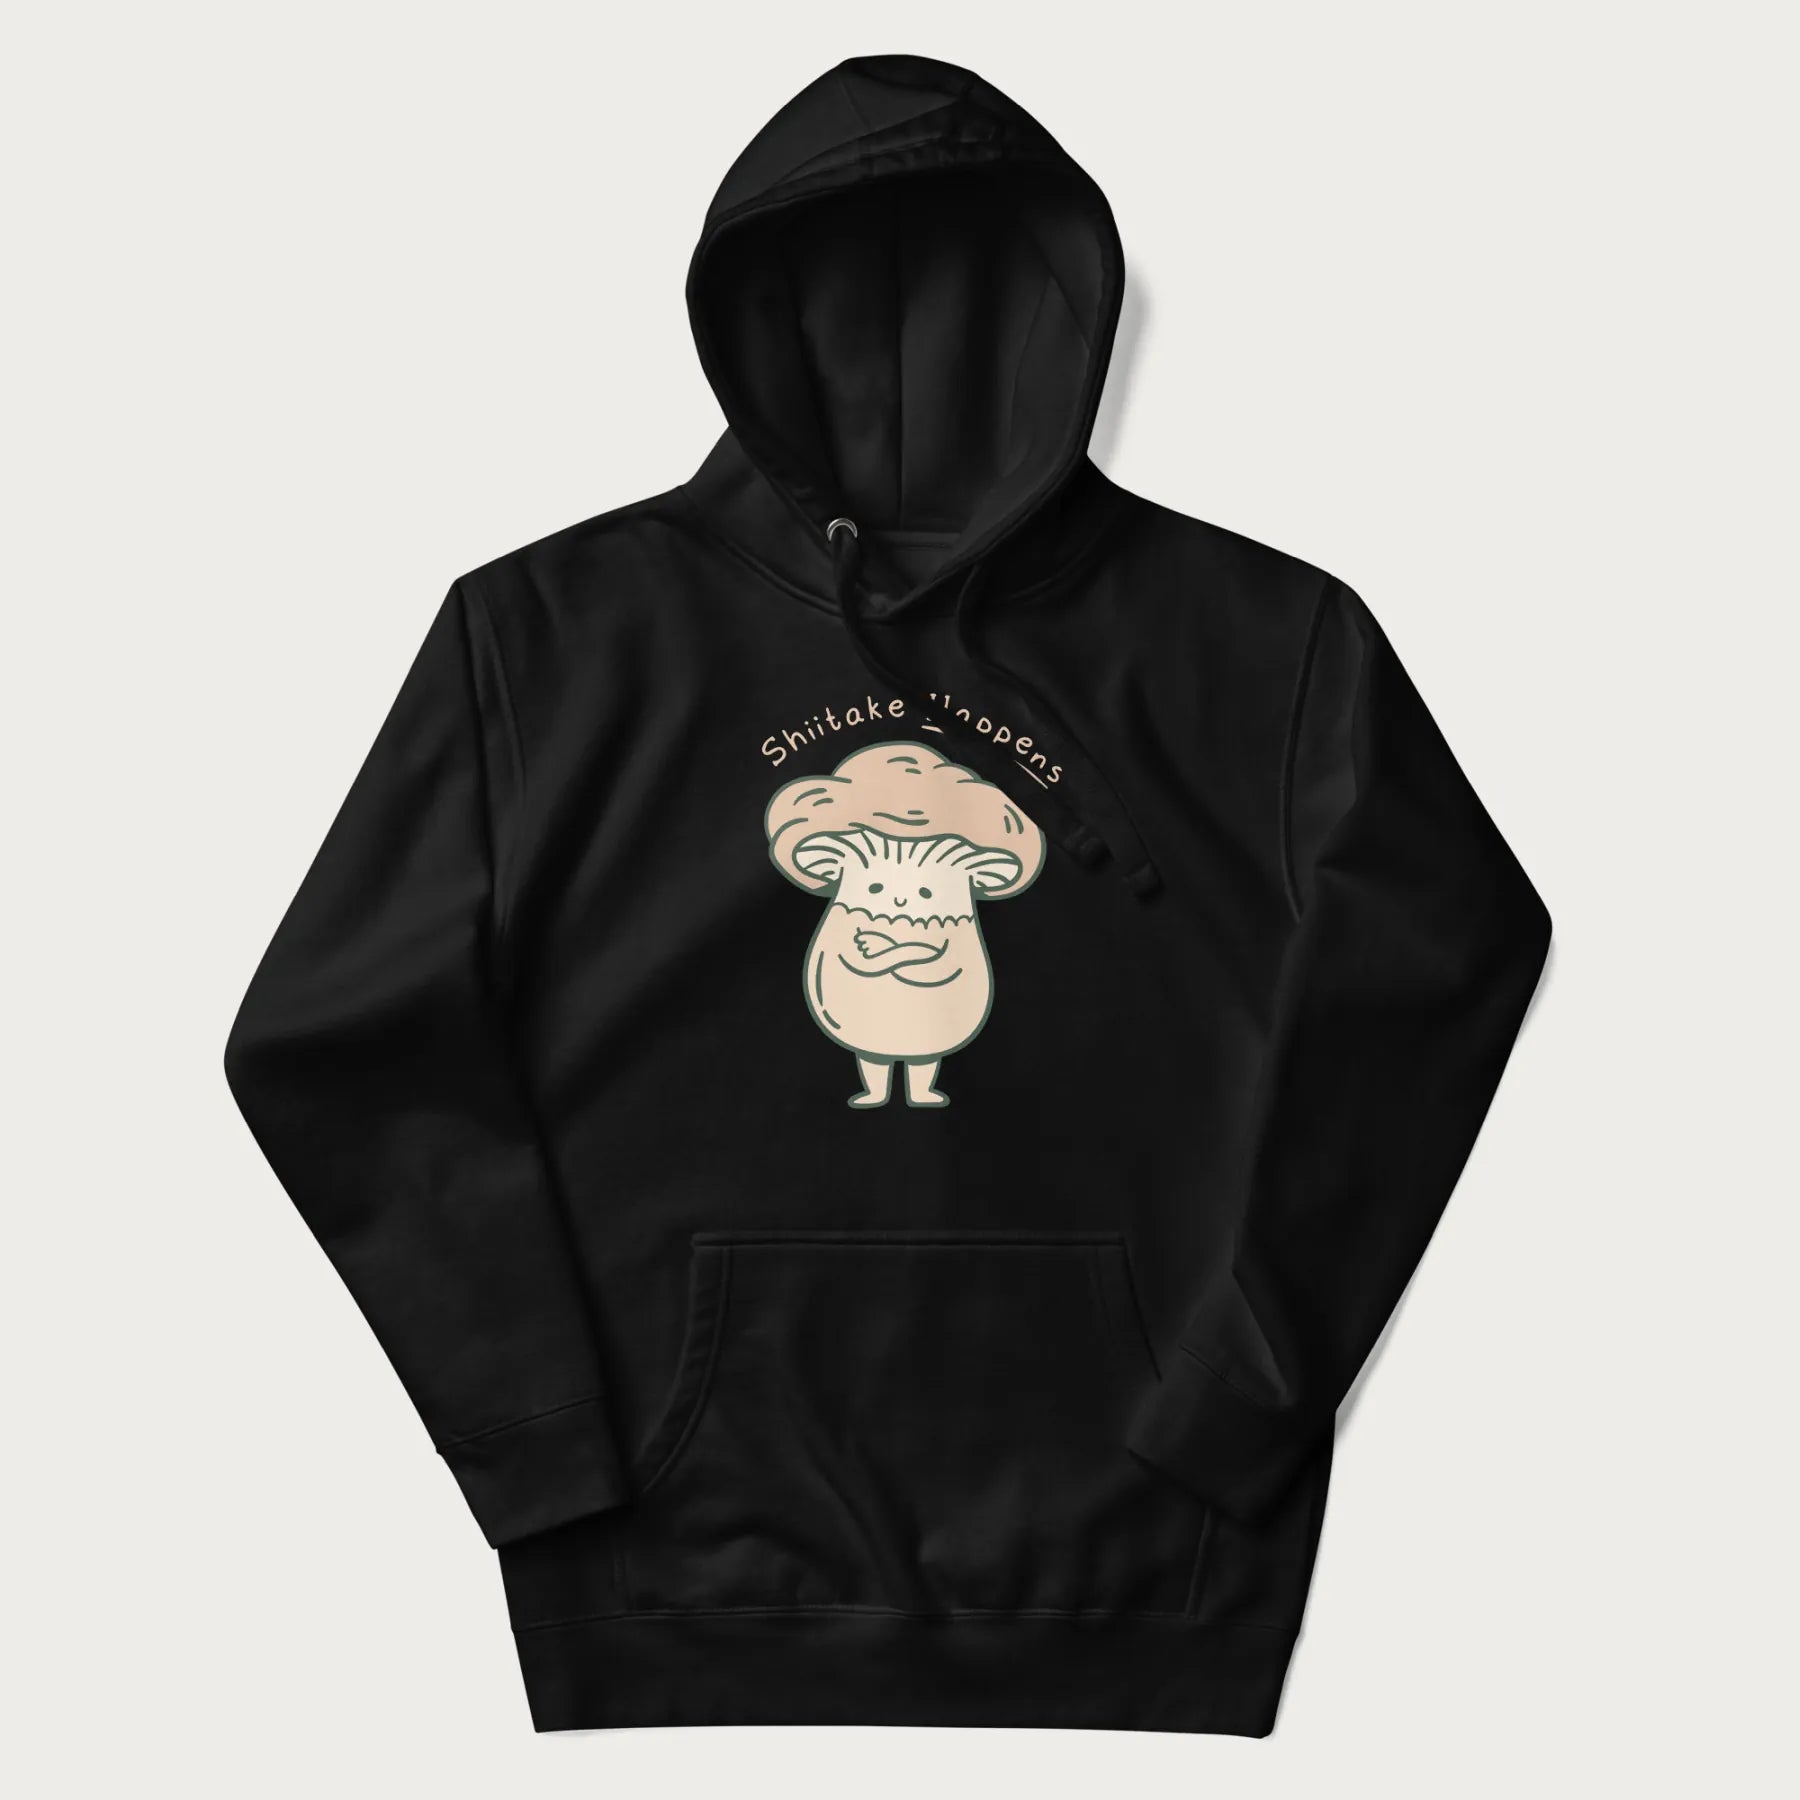 Black hoodie with a graphic of an adorable mushroom character and the text 'Shiitake Happens'.